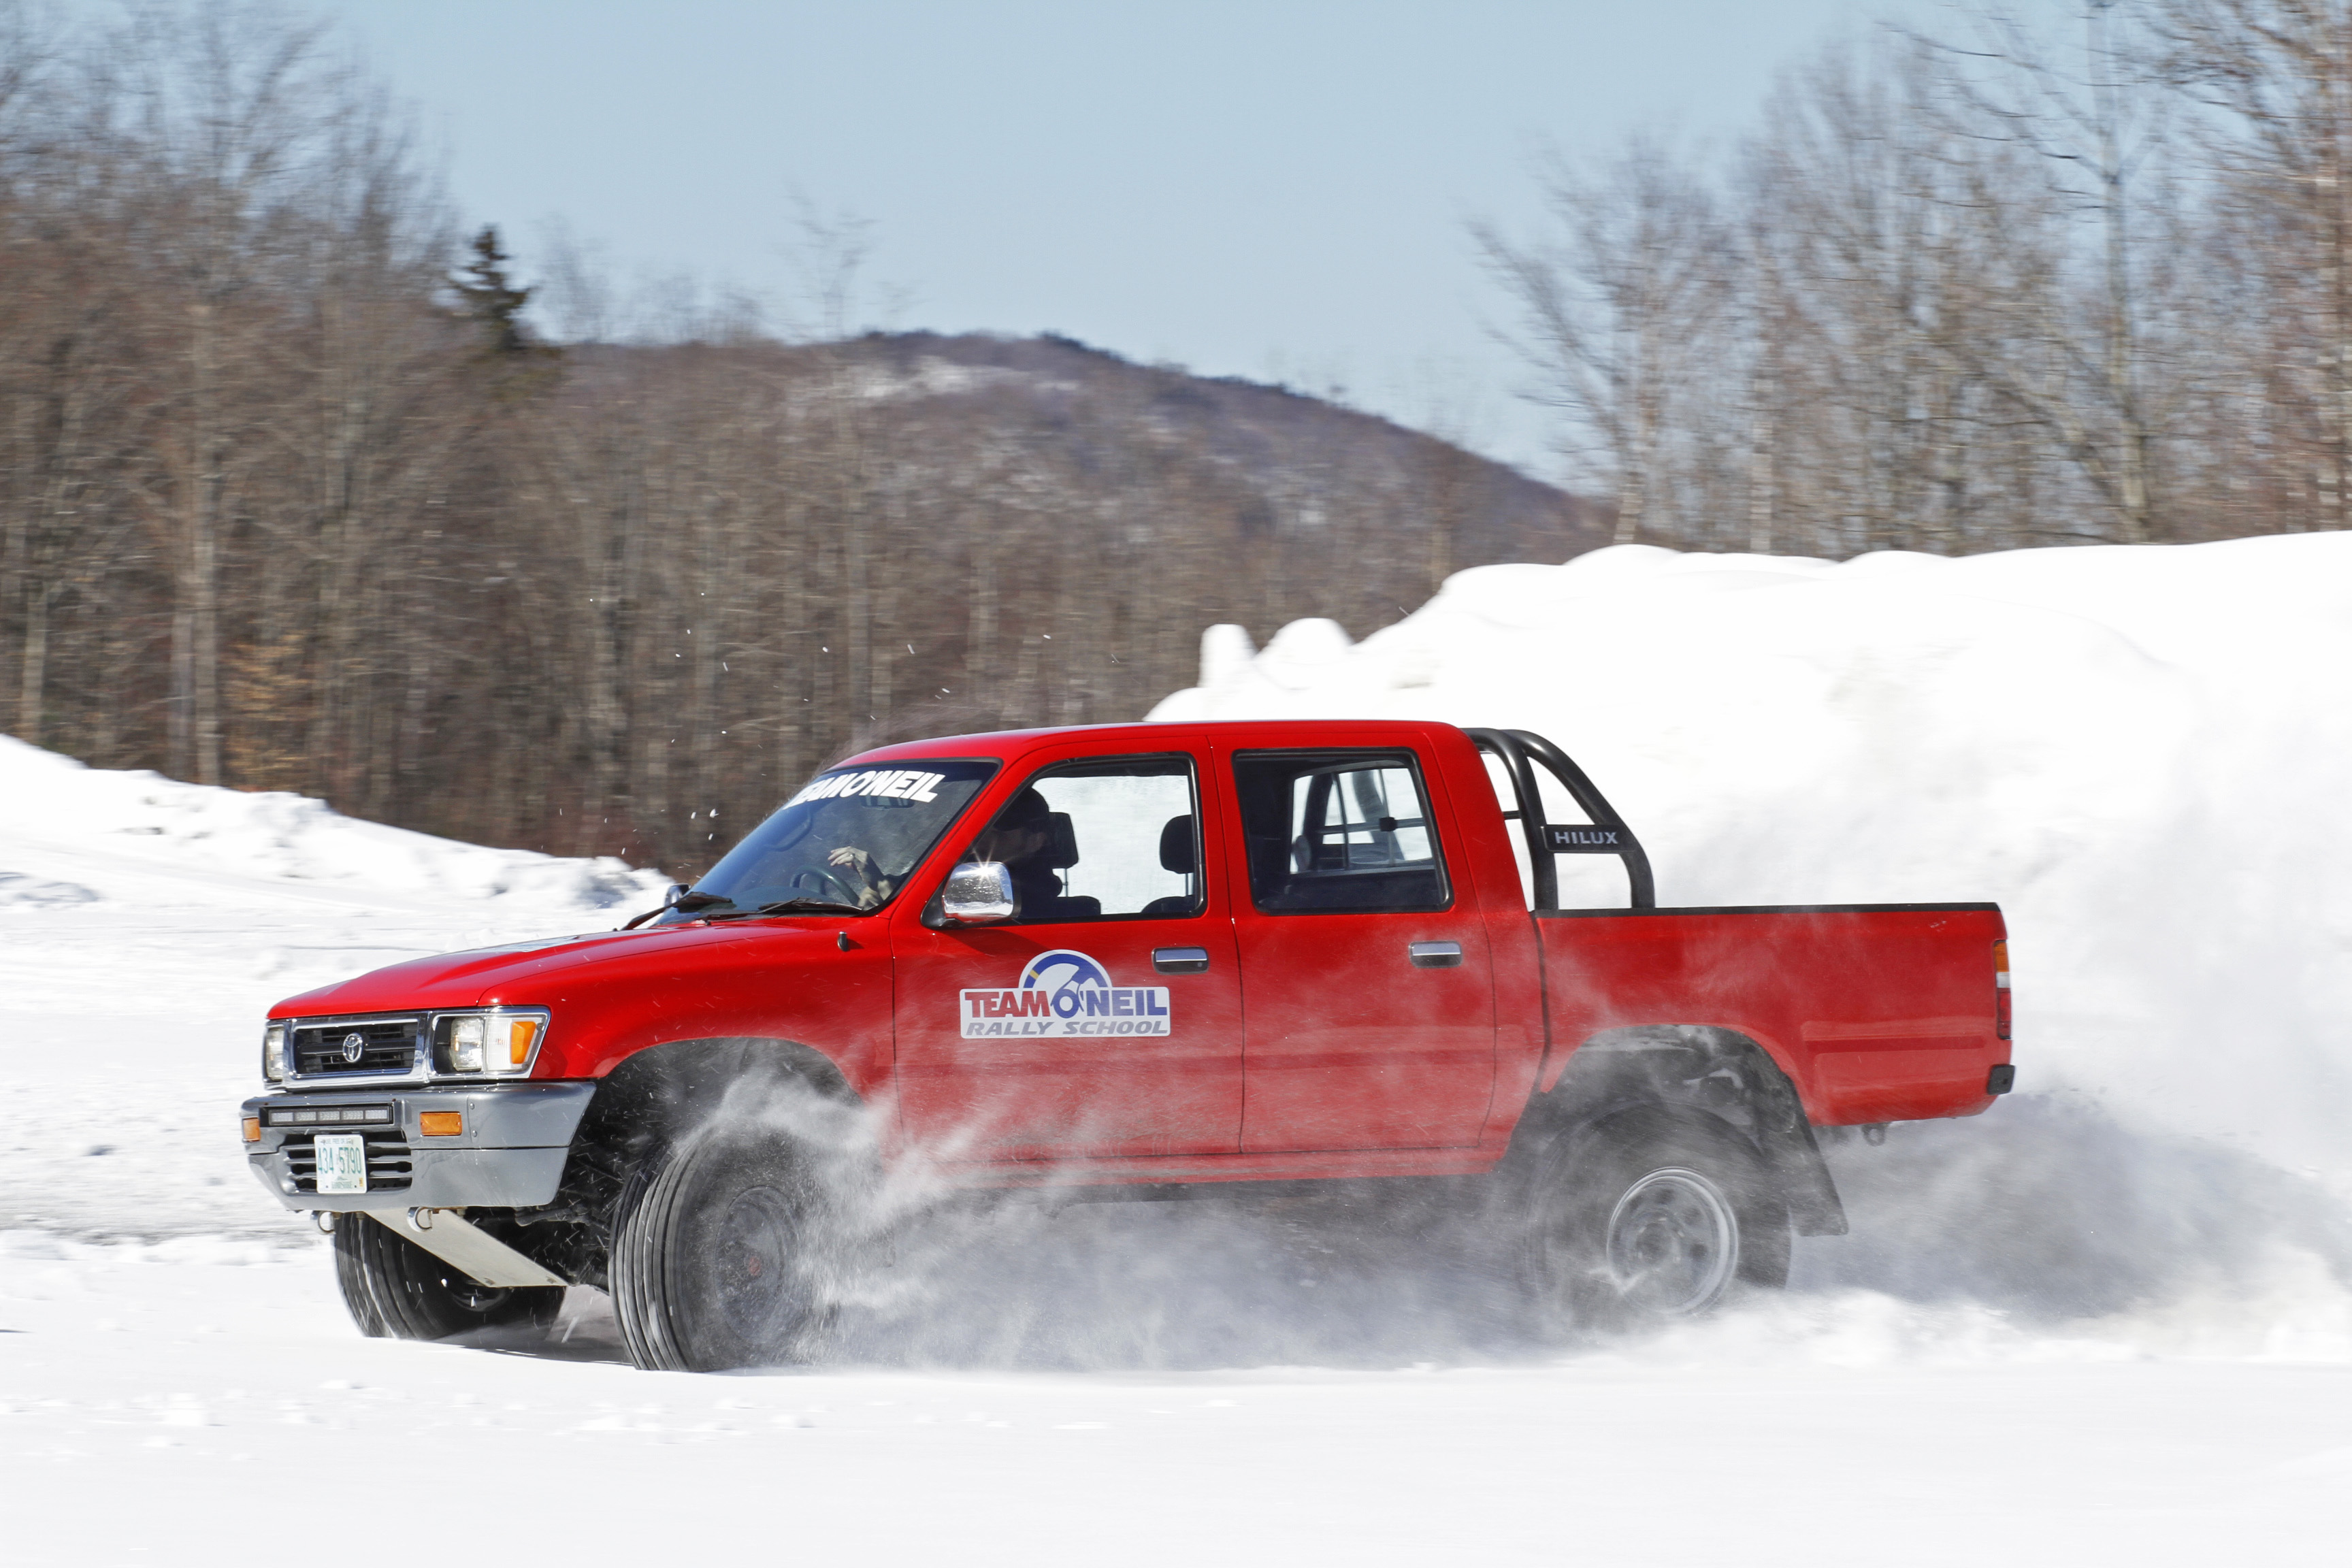 Toyota HiLux driving through snow in the White Mountains in New Hampshire